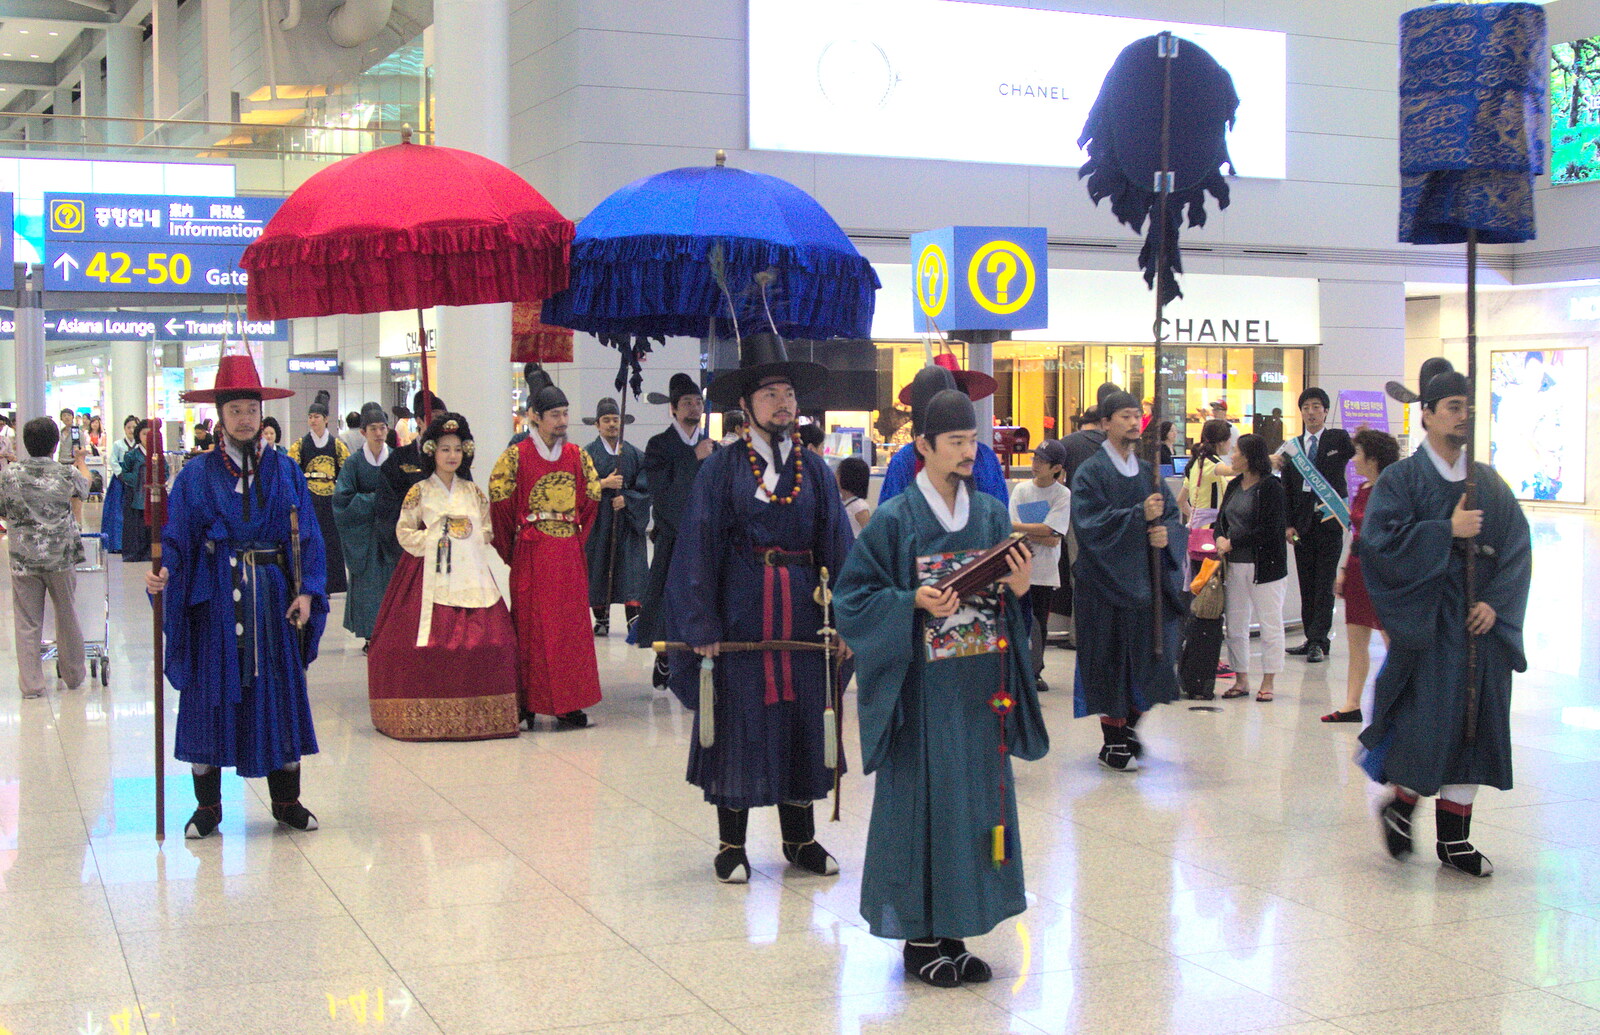 A visit from the royal family is re-enacted from Seomun Market, Daegu, South Korea - 1st July 2012